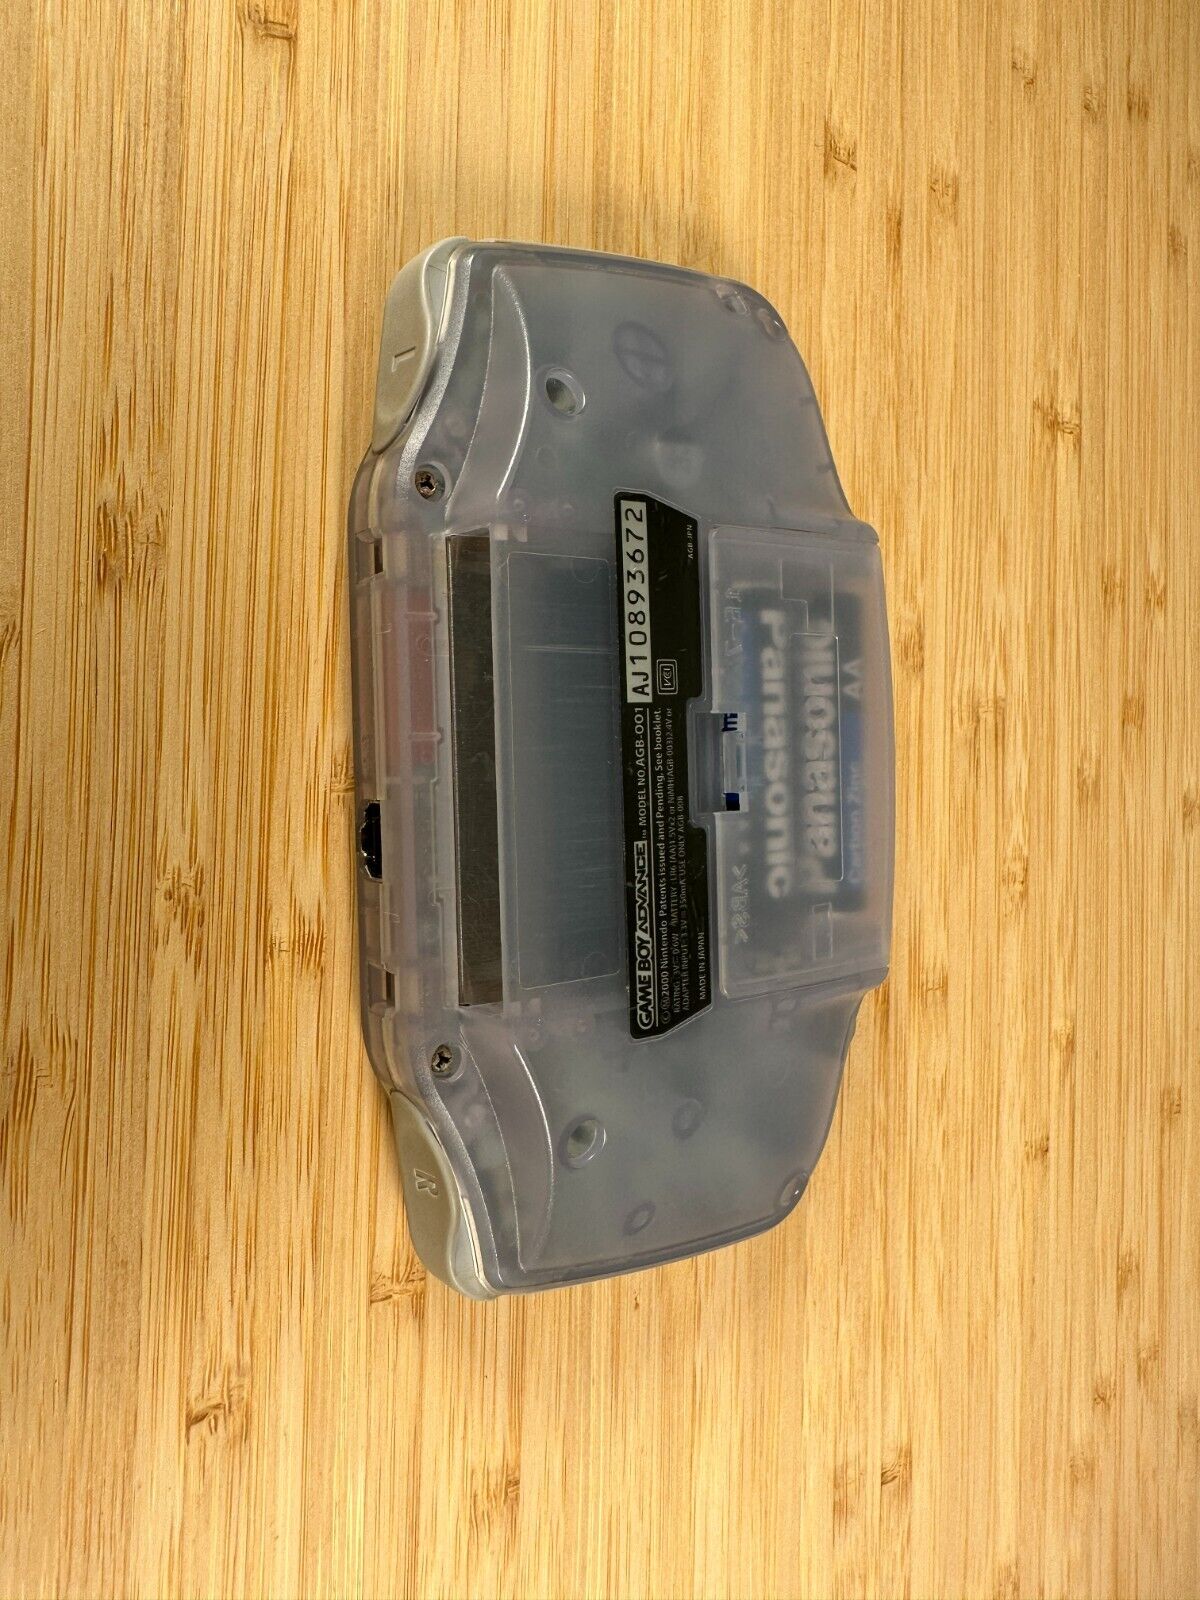 Nintendo GameBoy Advance Clear Gray AGB-001 Game Boy Console w Box  Authentic and Tested, Works Good, RARE 